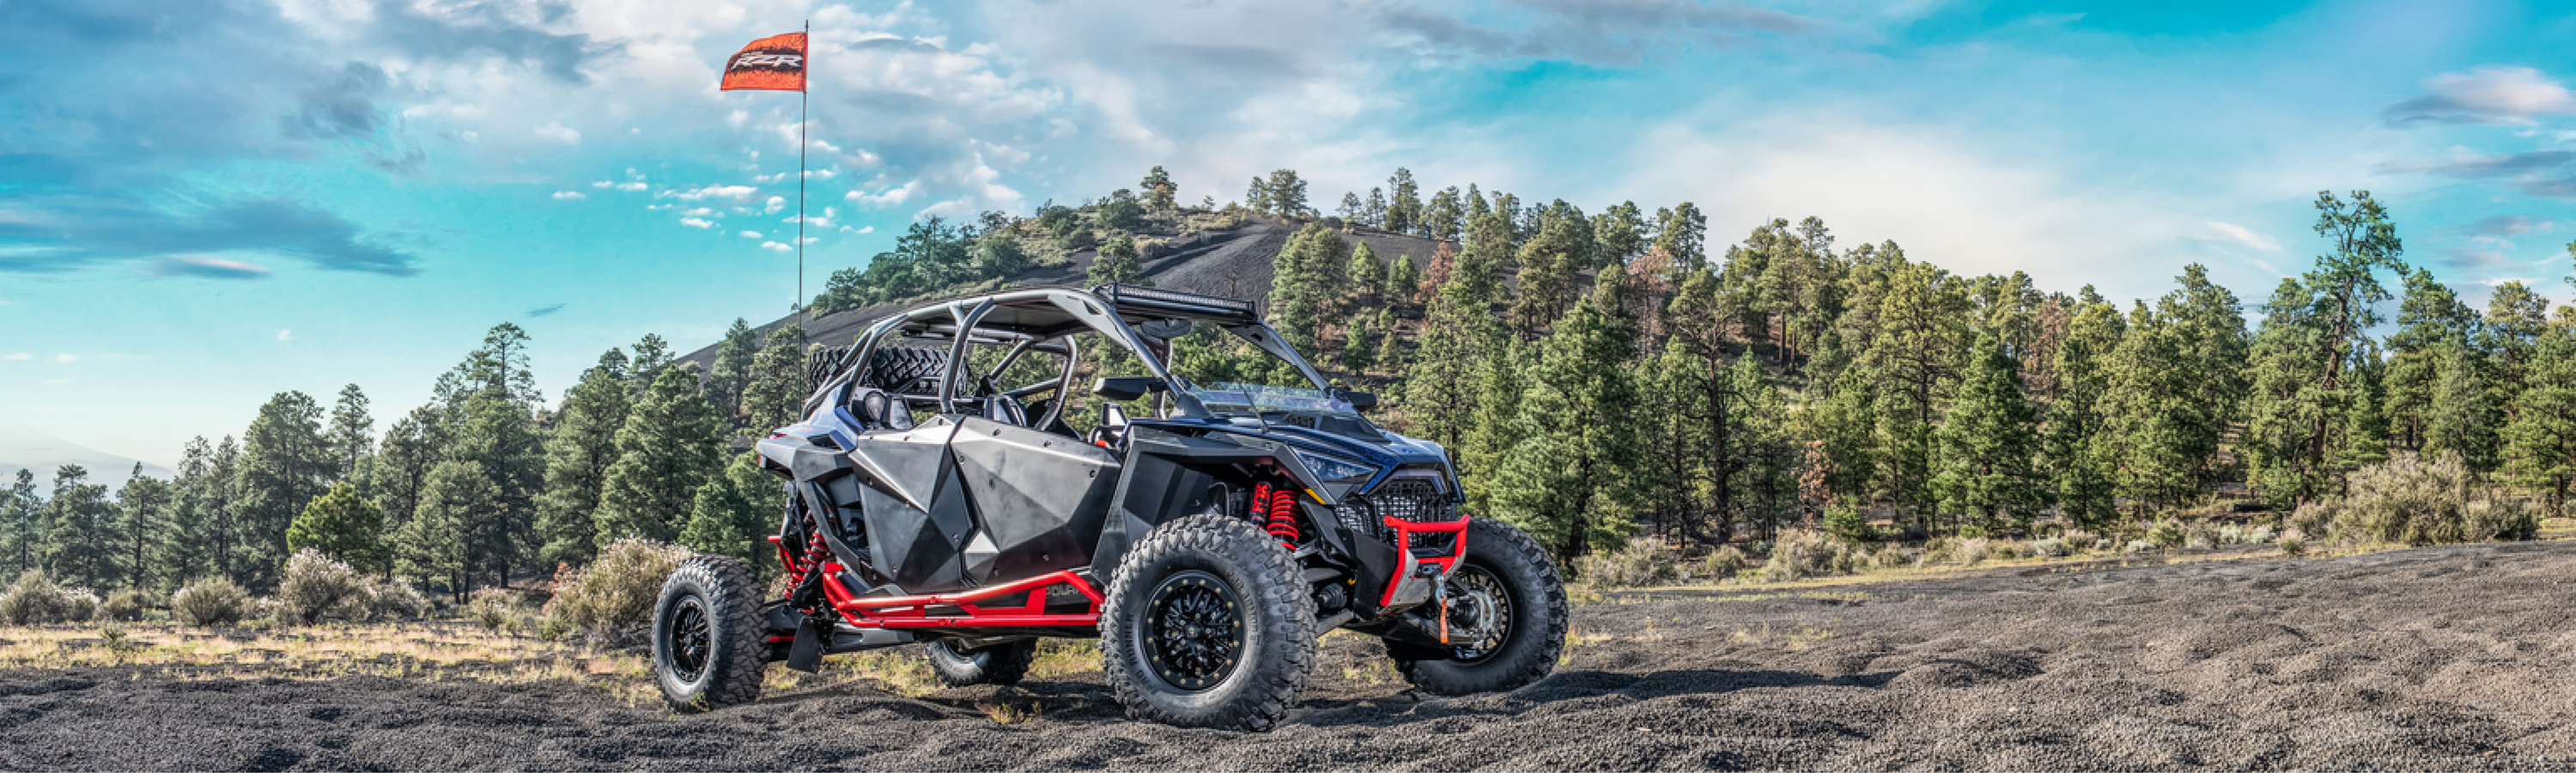 2019 Can-Am® Wild Catl for sale in Leaders RPM, Kalamazoo, Michigan